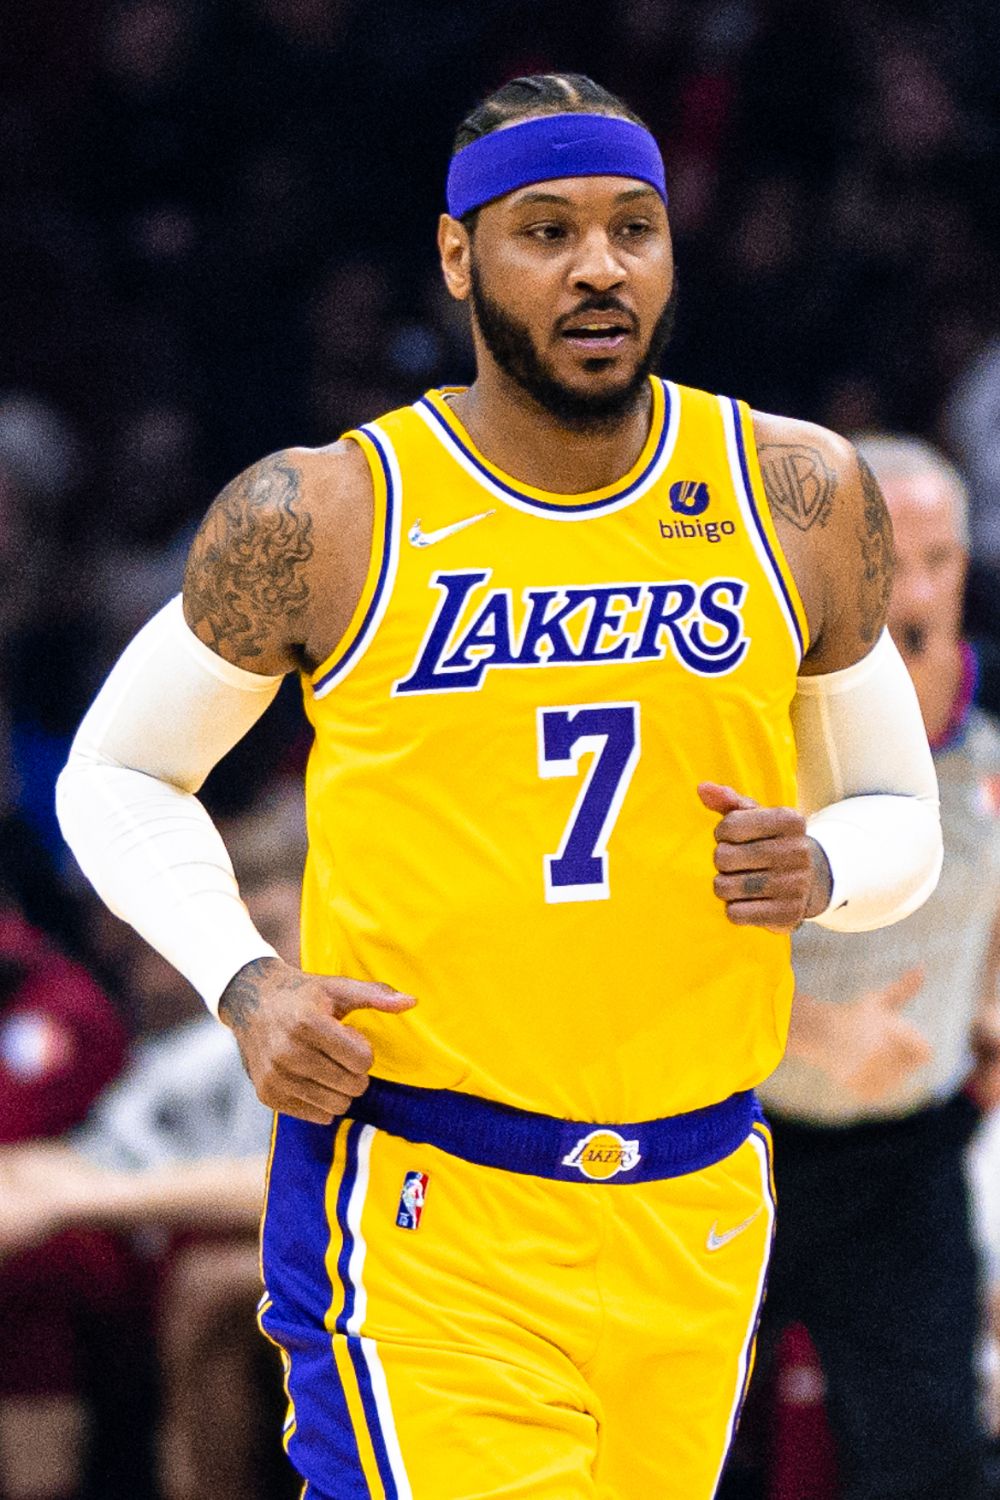 Carmelo Anthony, The NBA Player